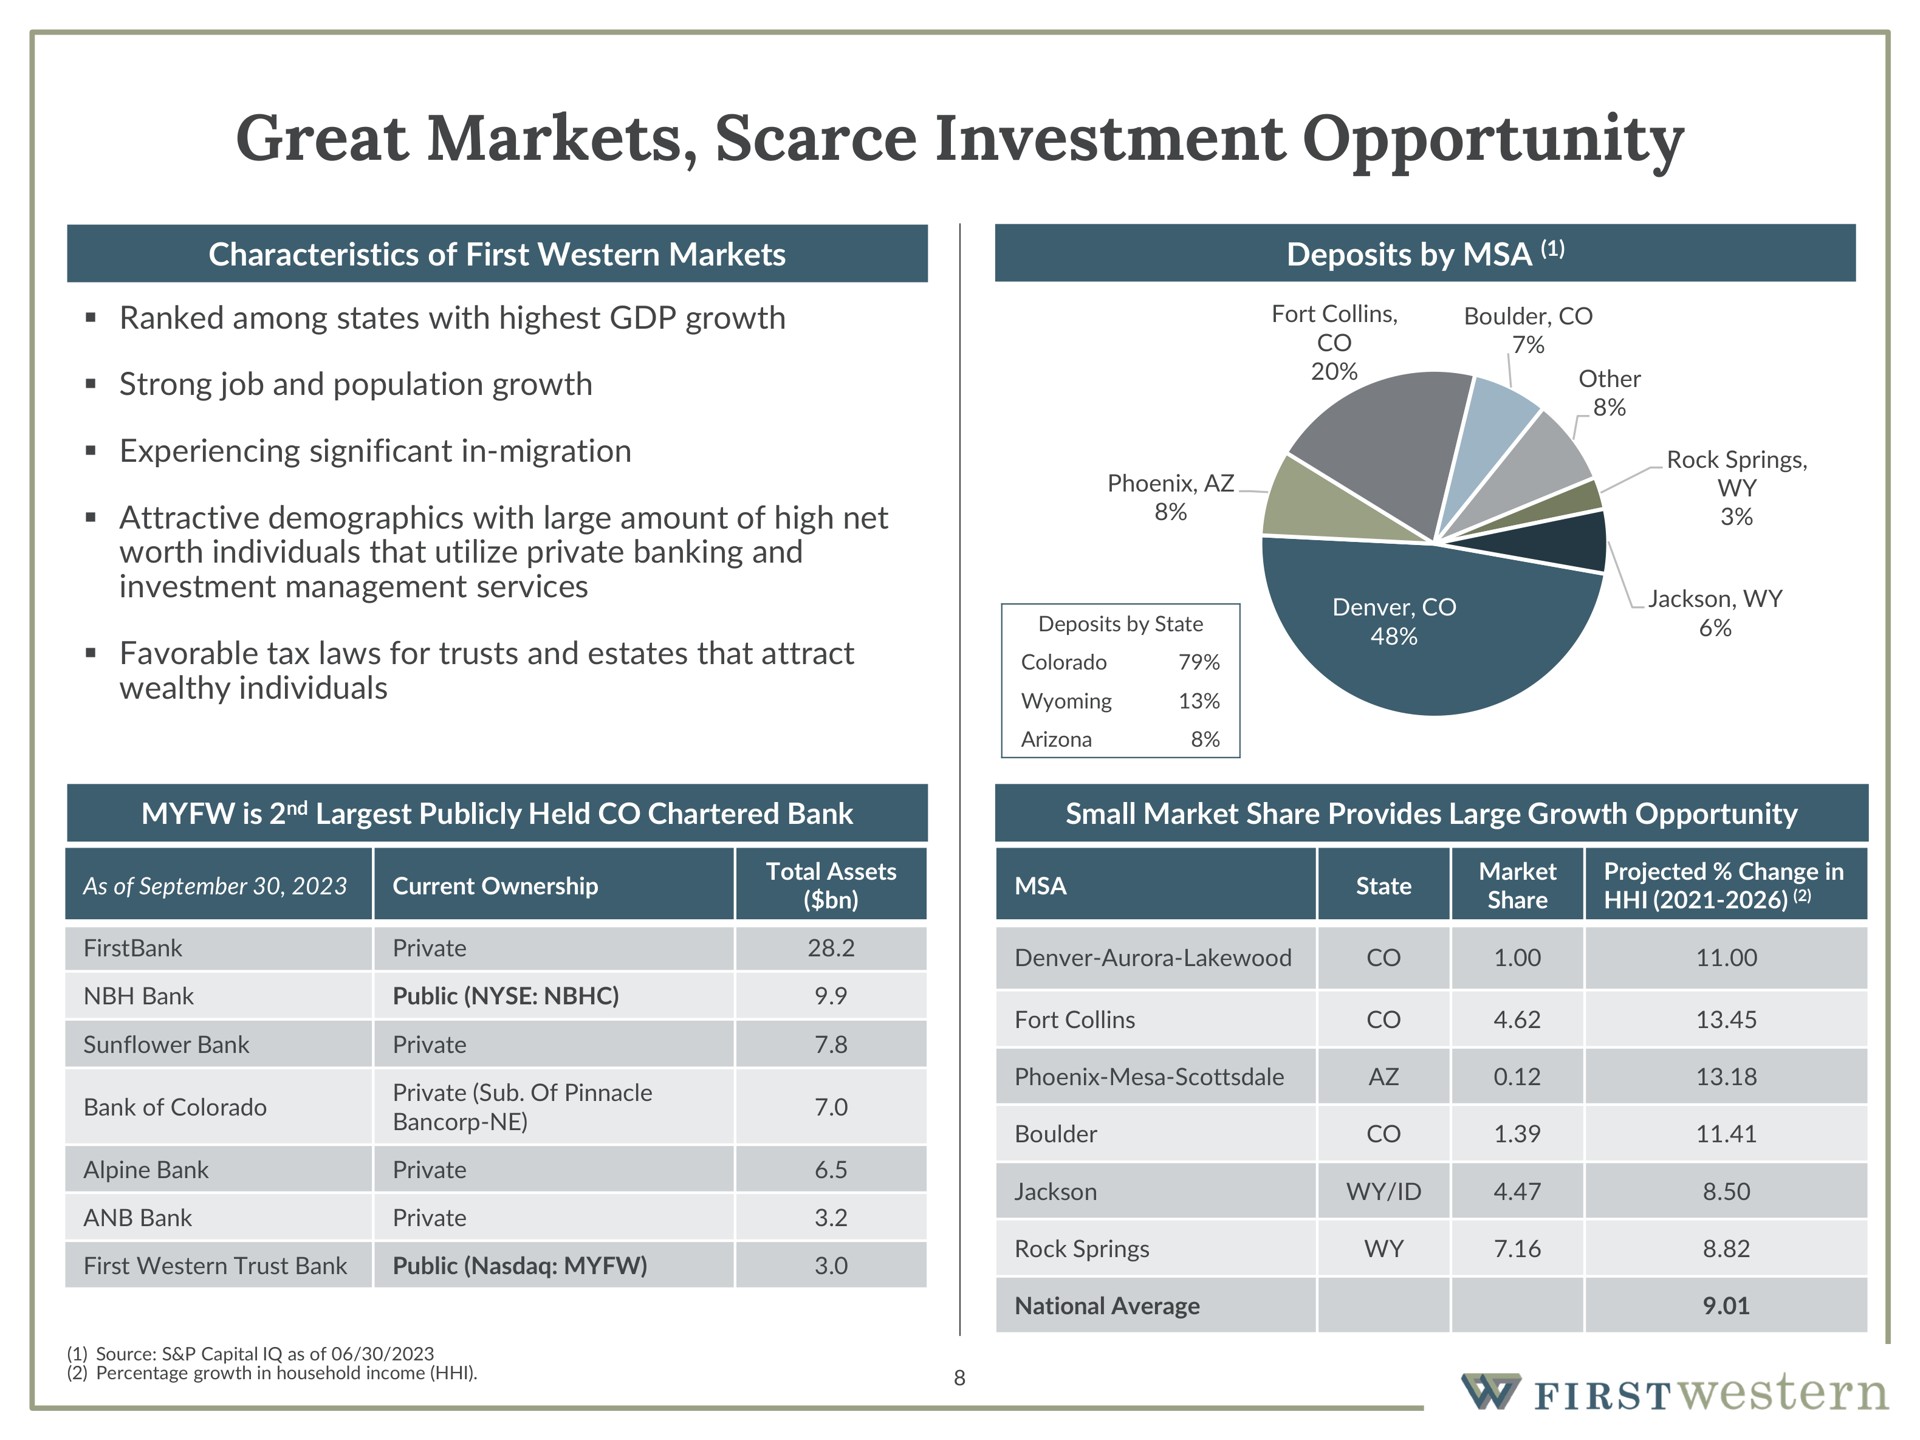 great markets scarce investment opportunity | First Western Financial